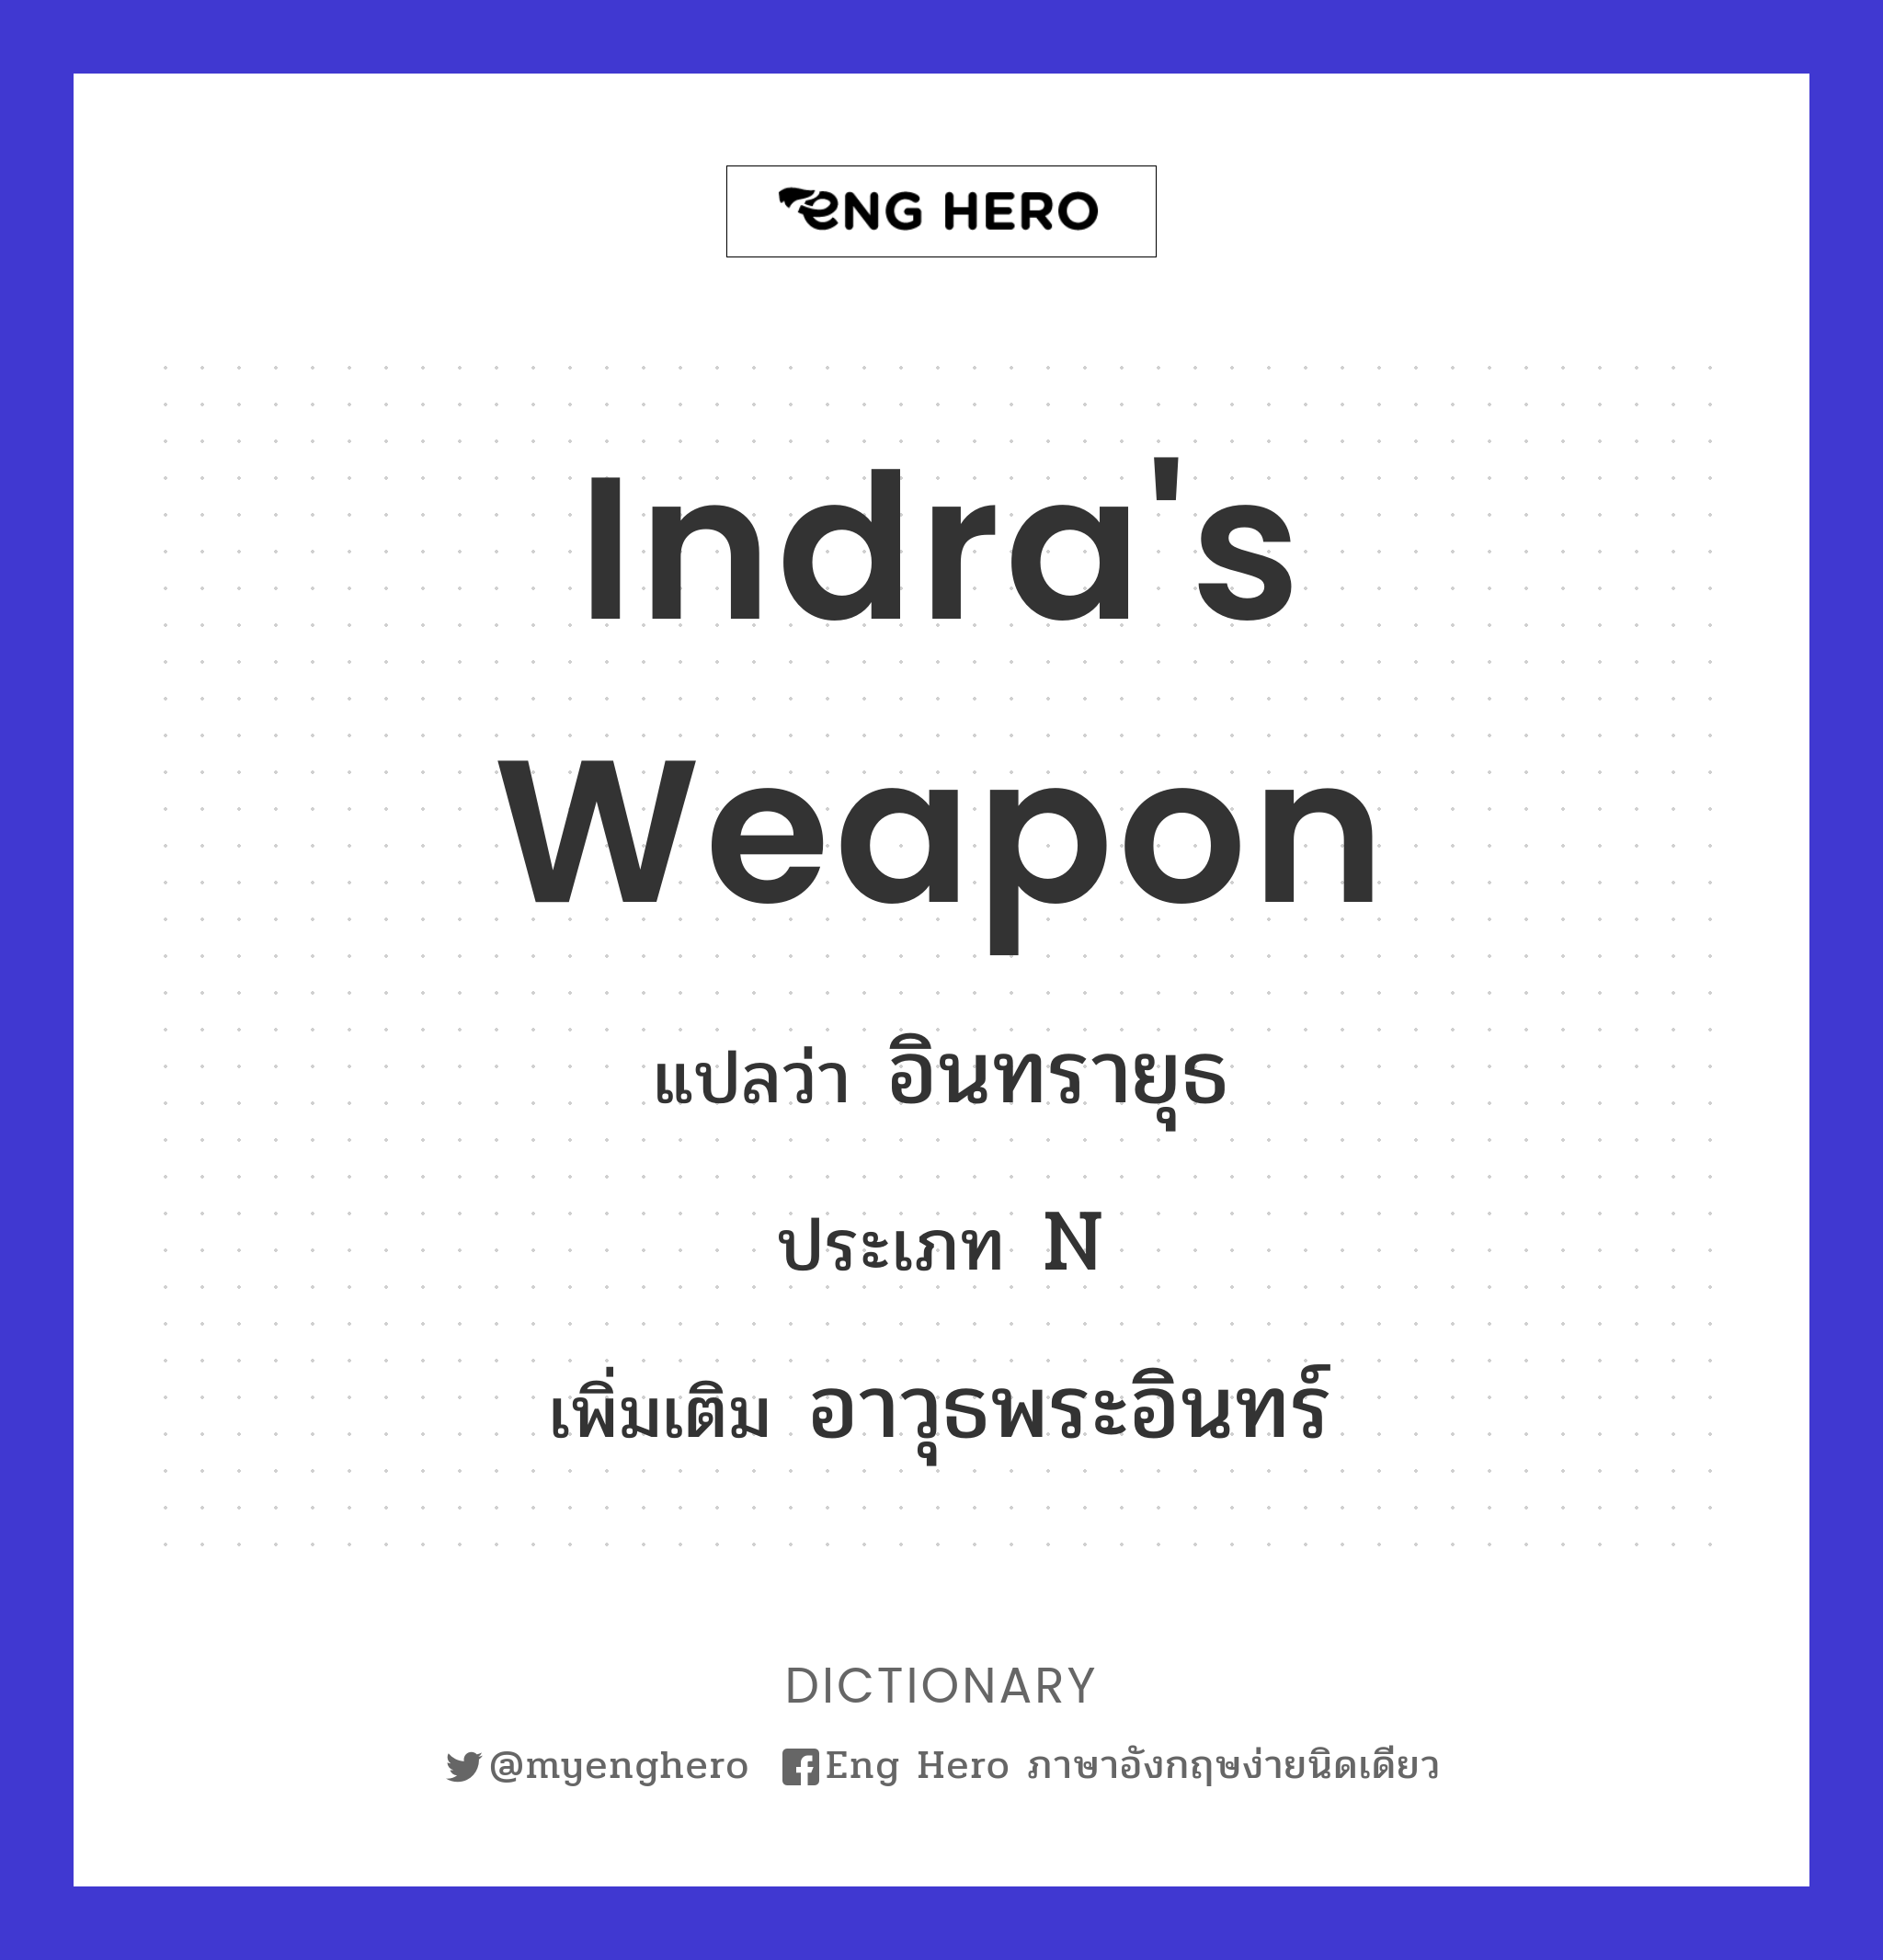 Indra's weapon